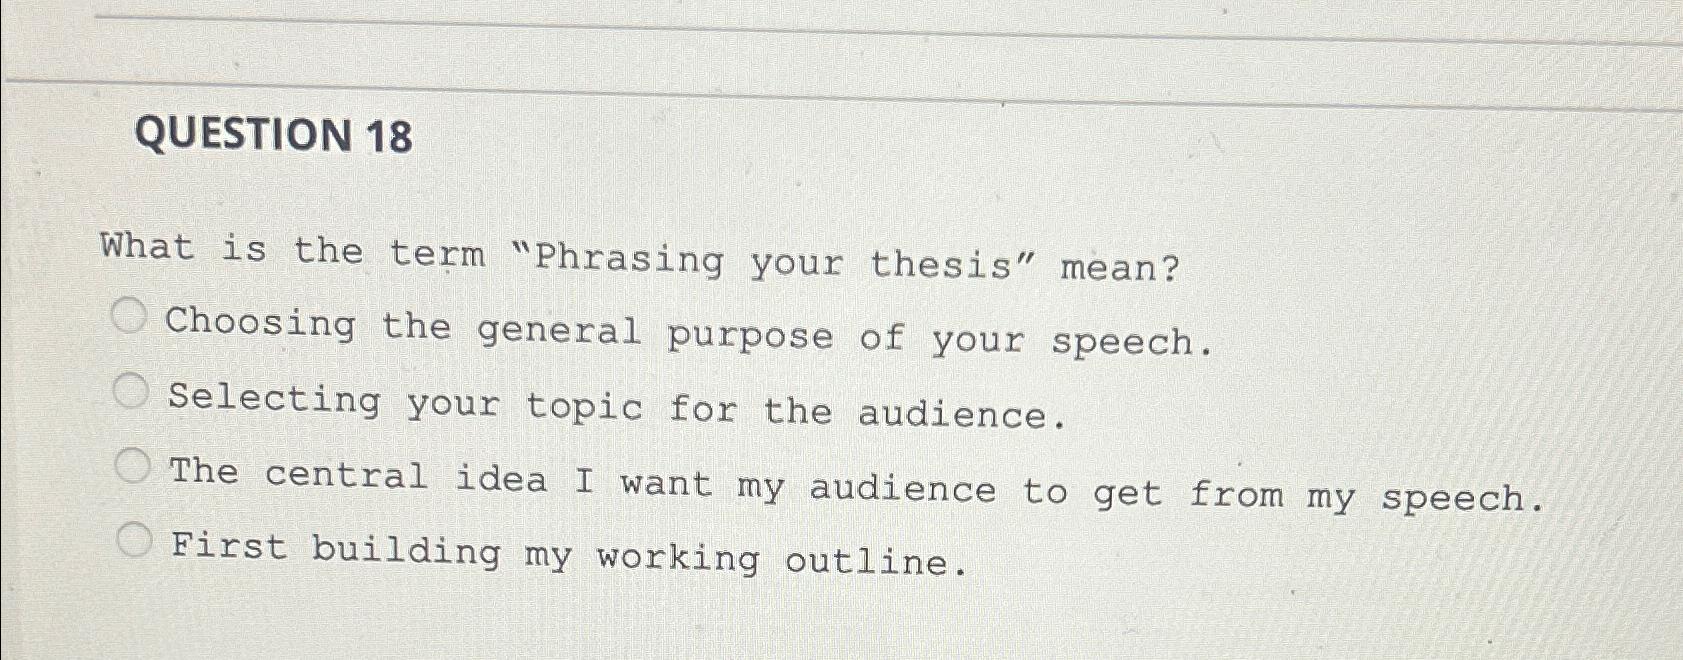 what is the term phrasing your thesis mean